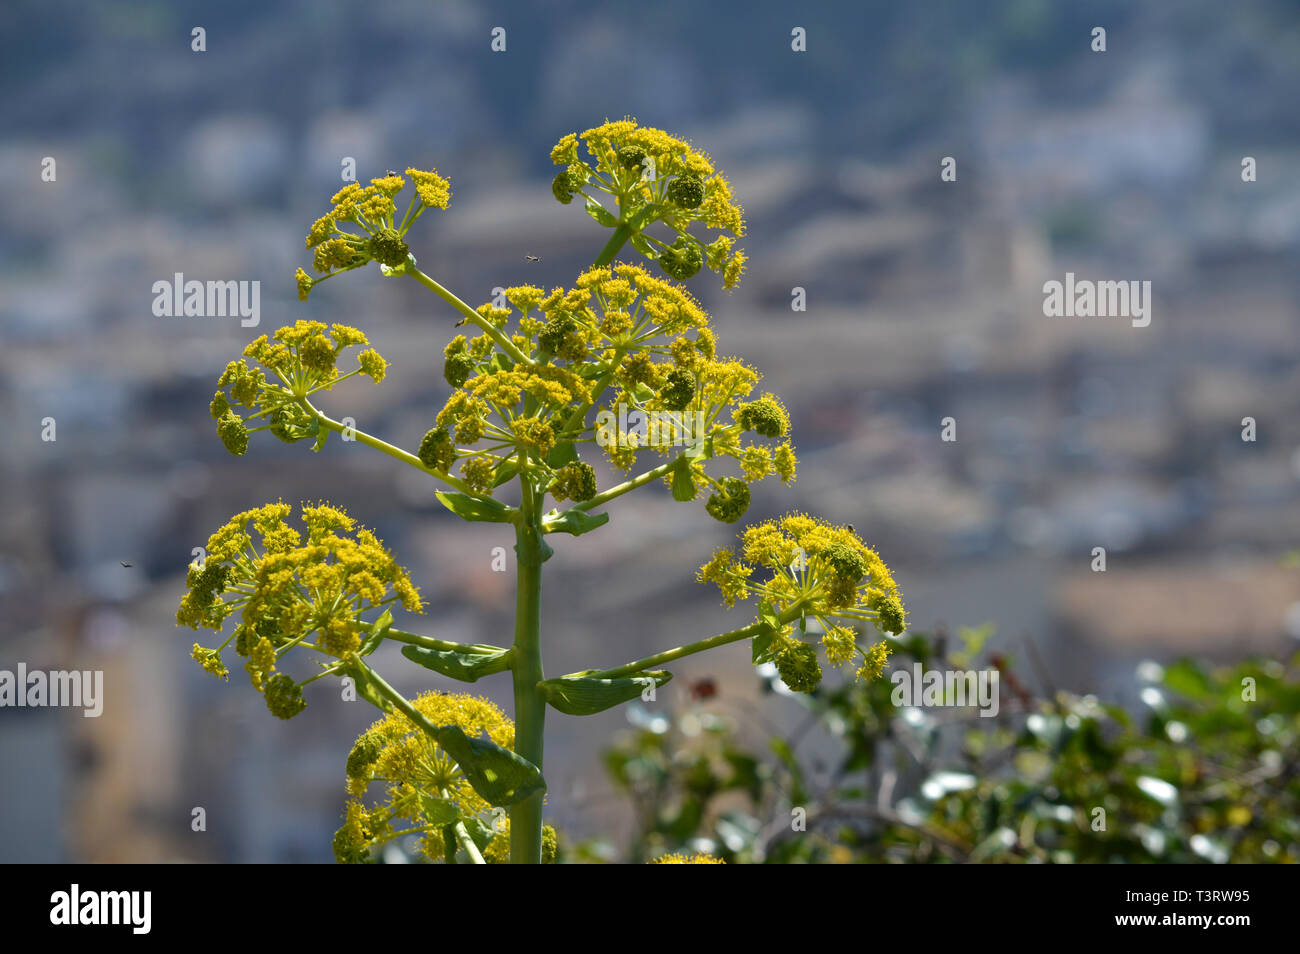 Close-up of a Giant Fennel in Bloom, Ferula communis, Nature, Macro, Sicilian Landscape, Italy, Europe Stock Photo